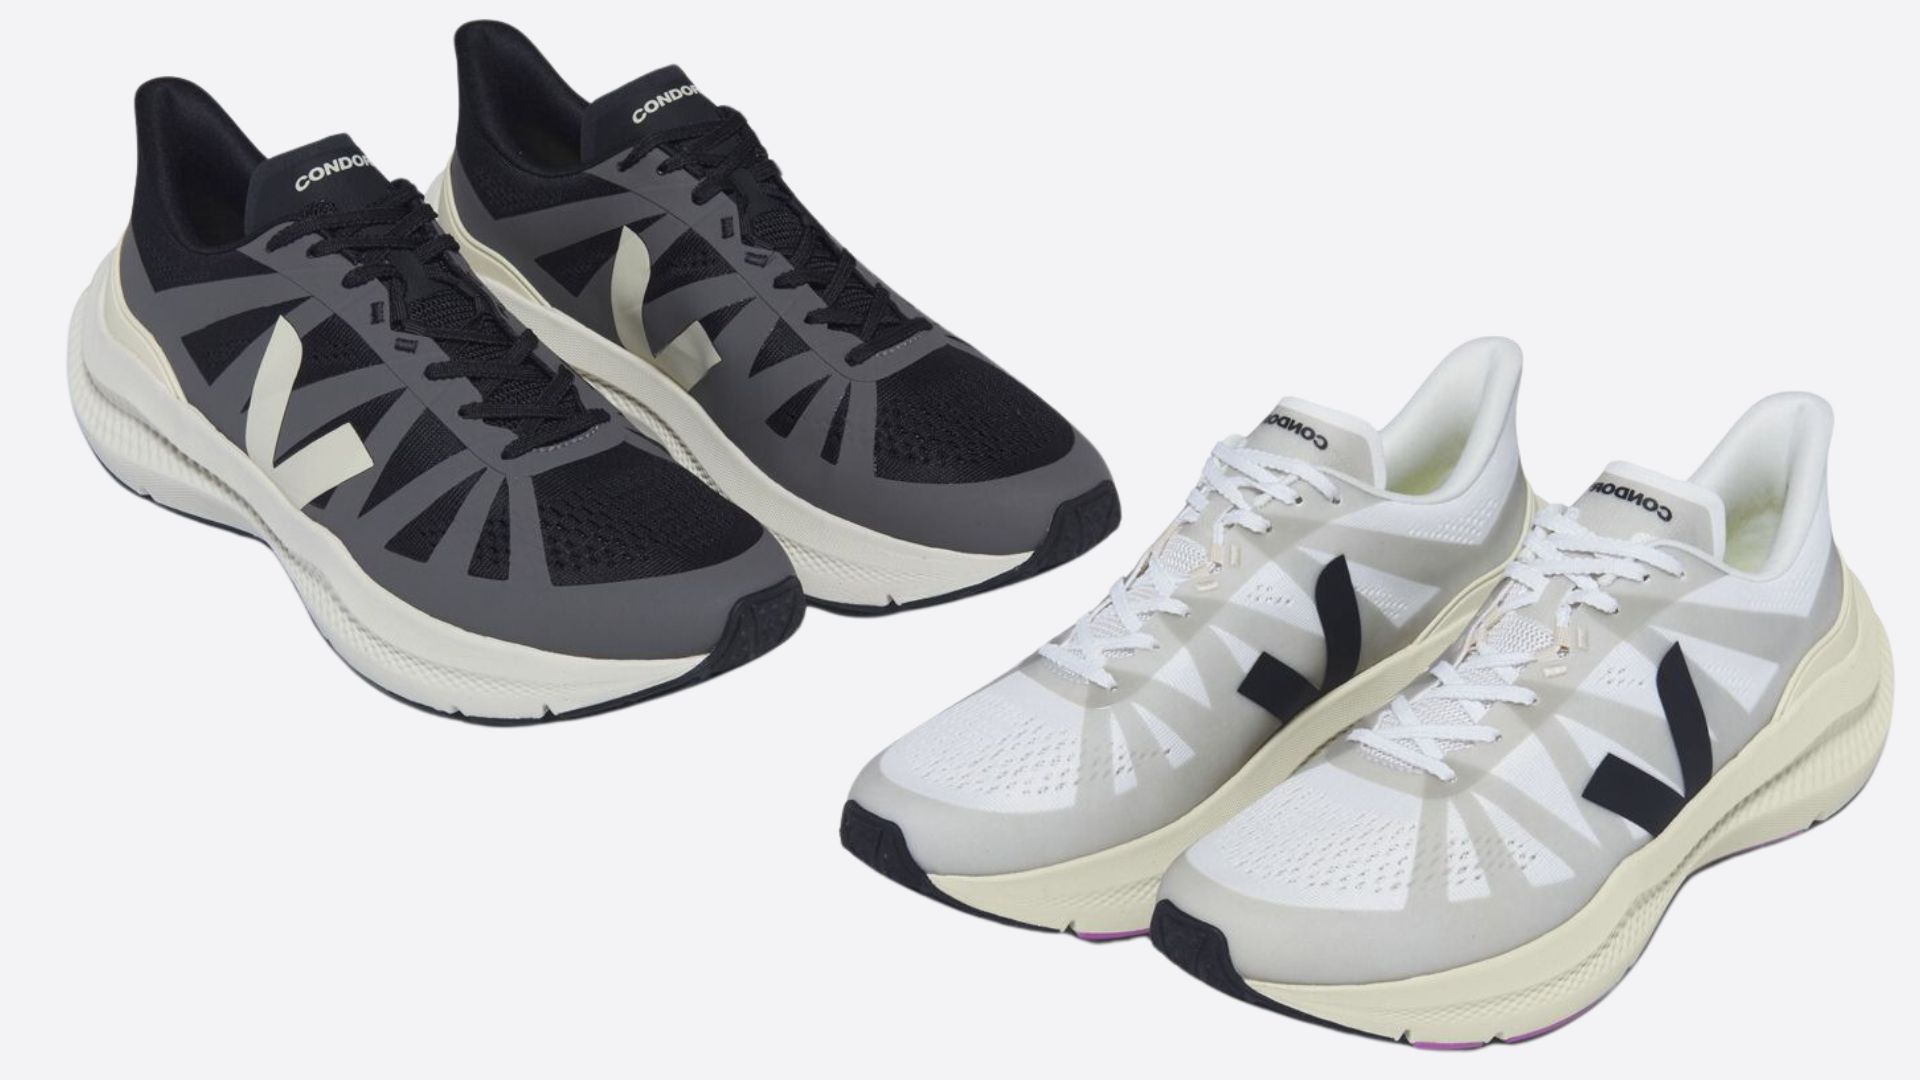 Veja Condor 3 running trainers in alternative black and grey and white and black colourways